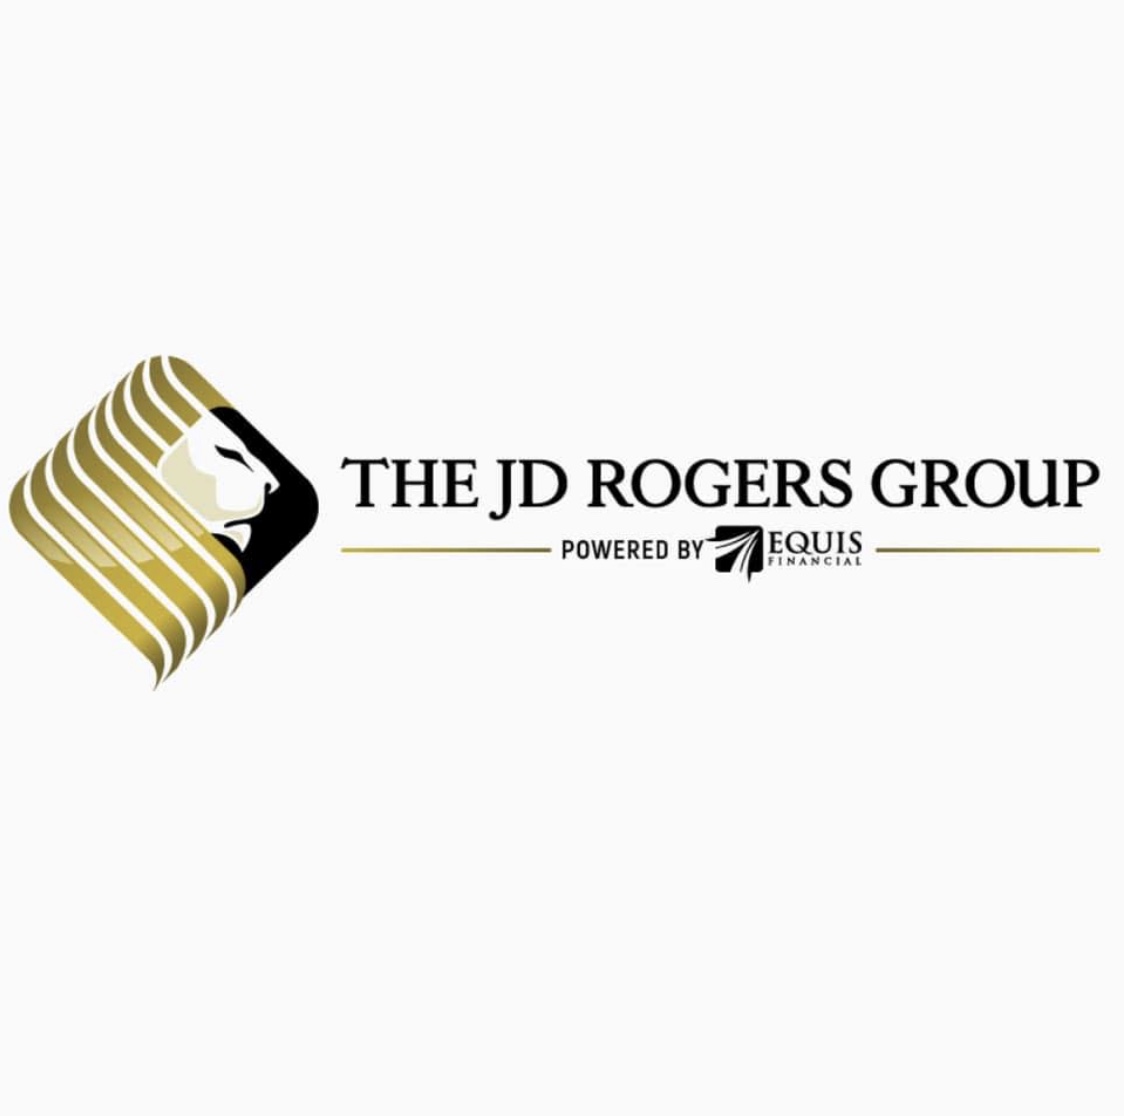 The JD Rogers Group logo